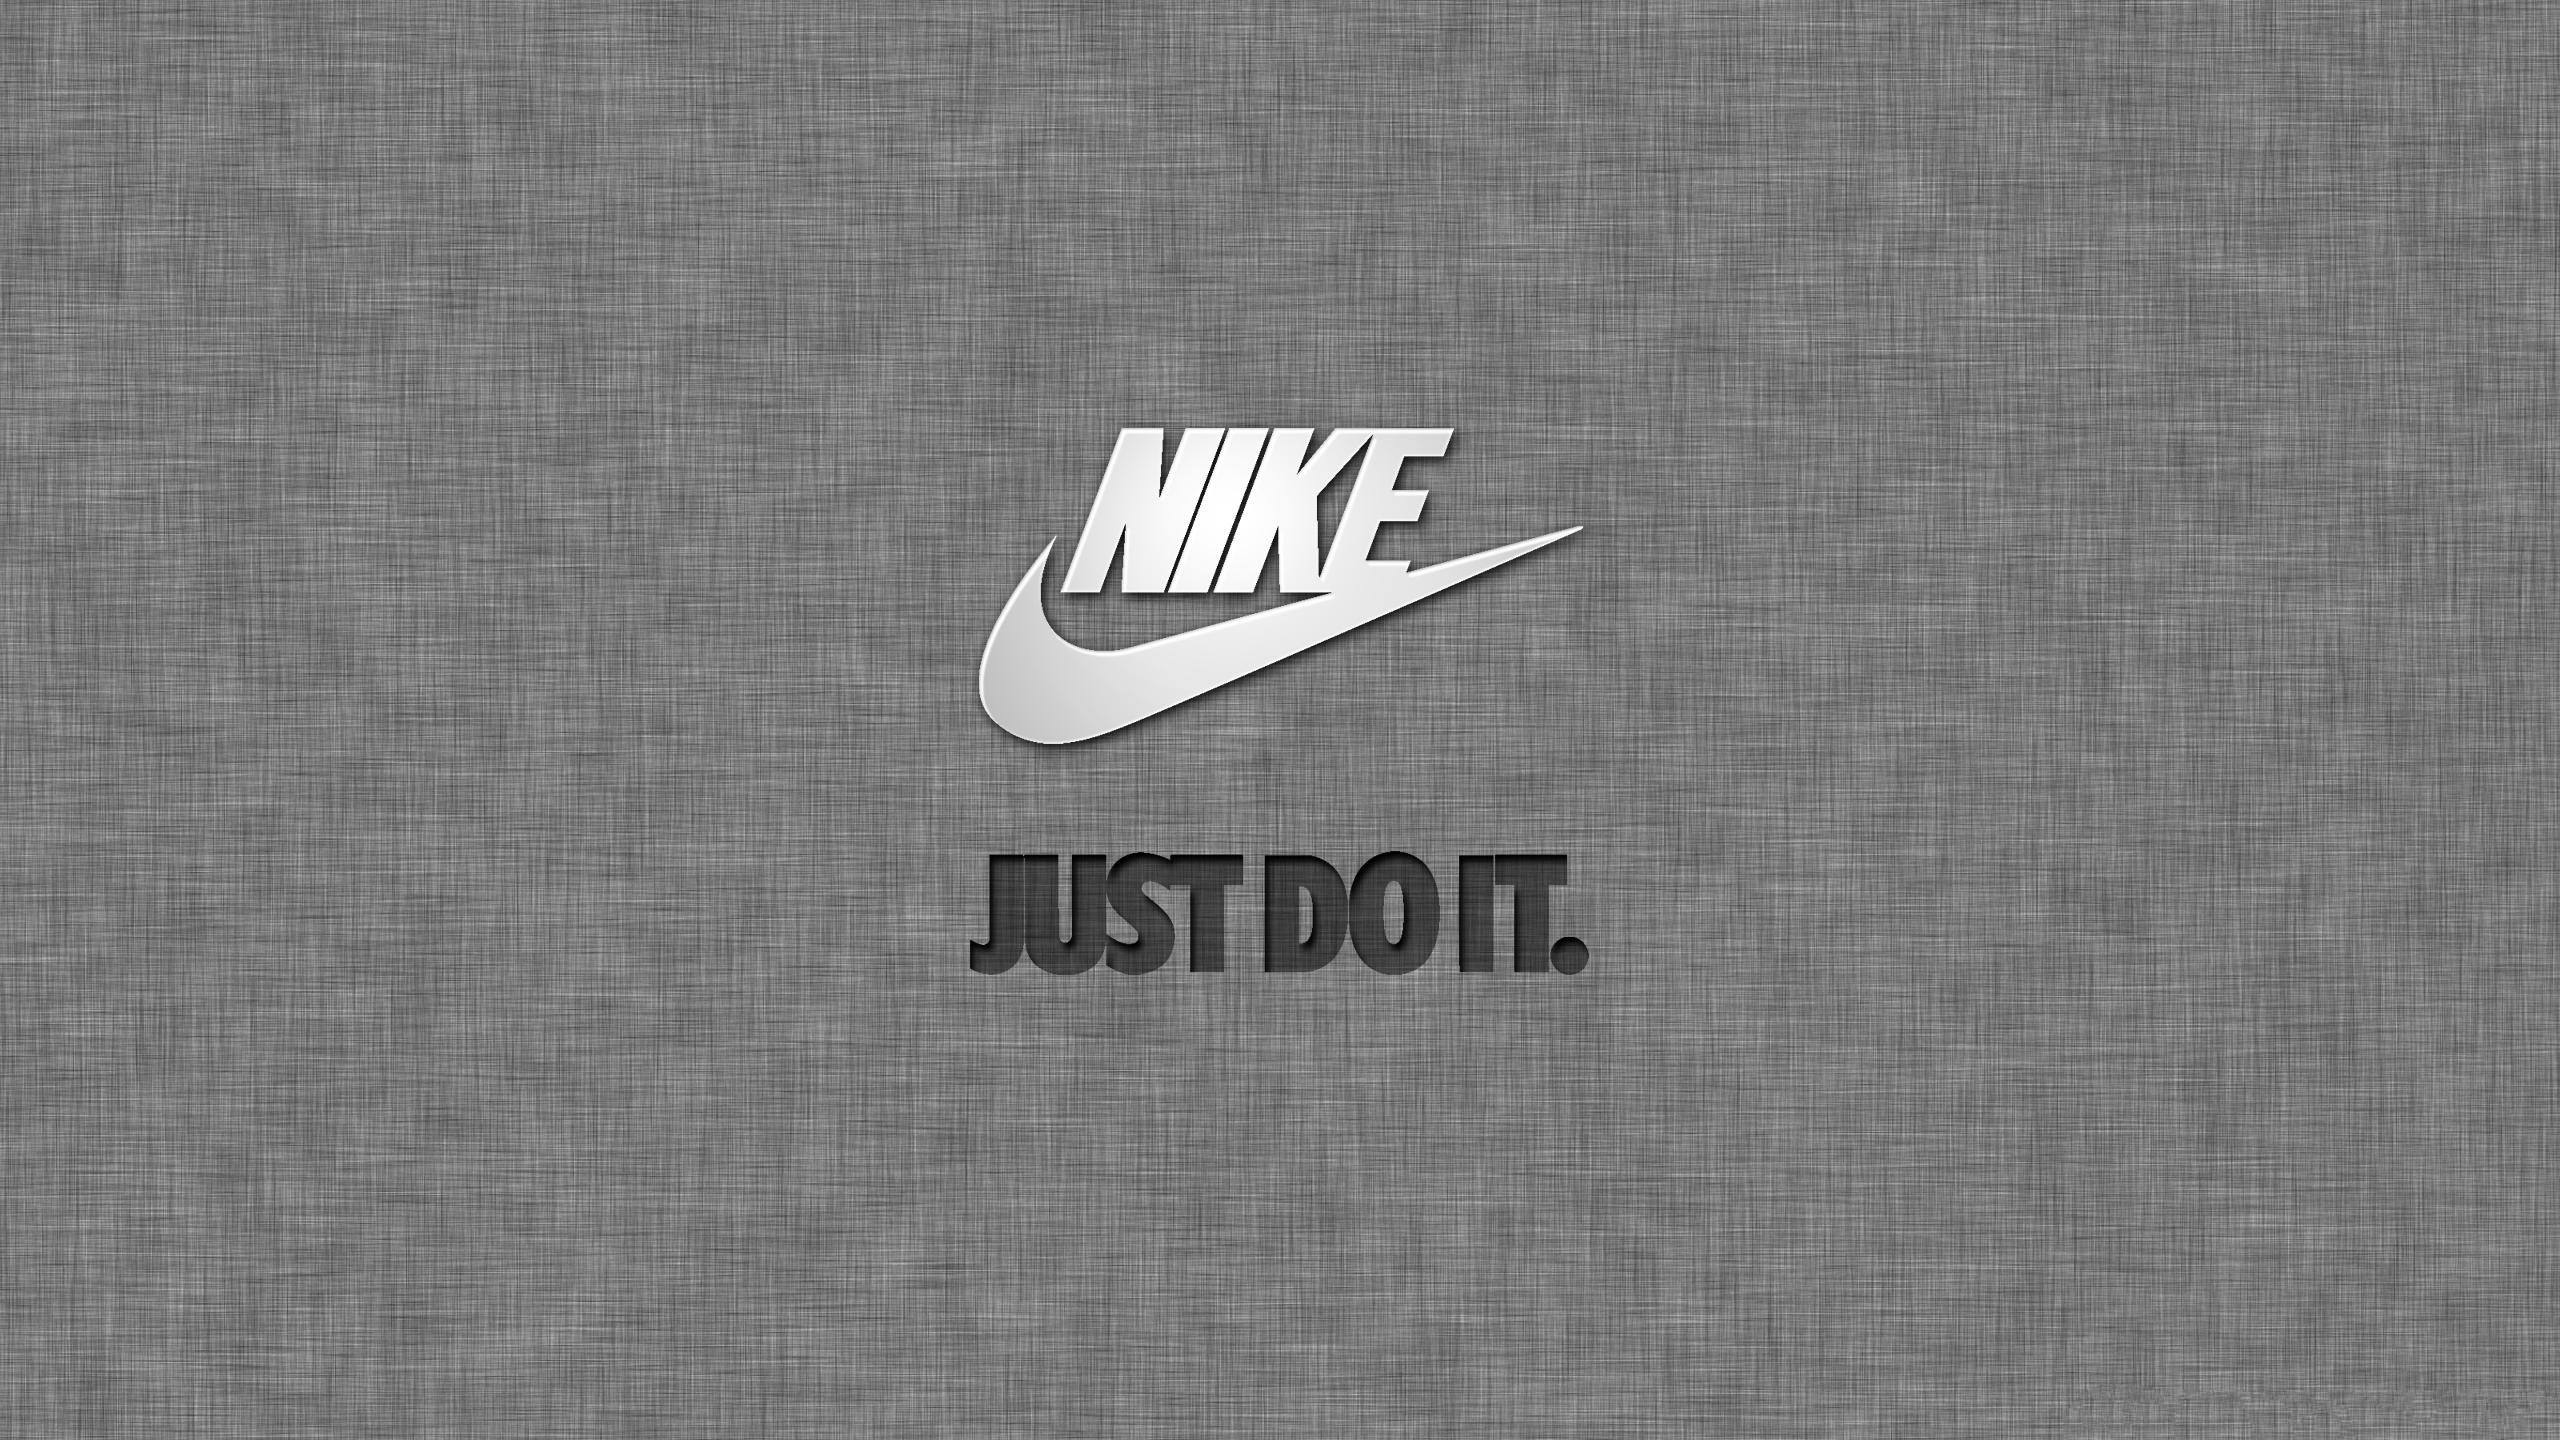 2560x1440 Search Results for “nike wallpaper hd” – Adorable Wallpapers